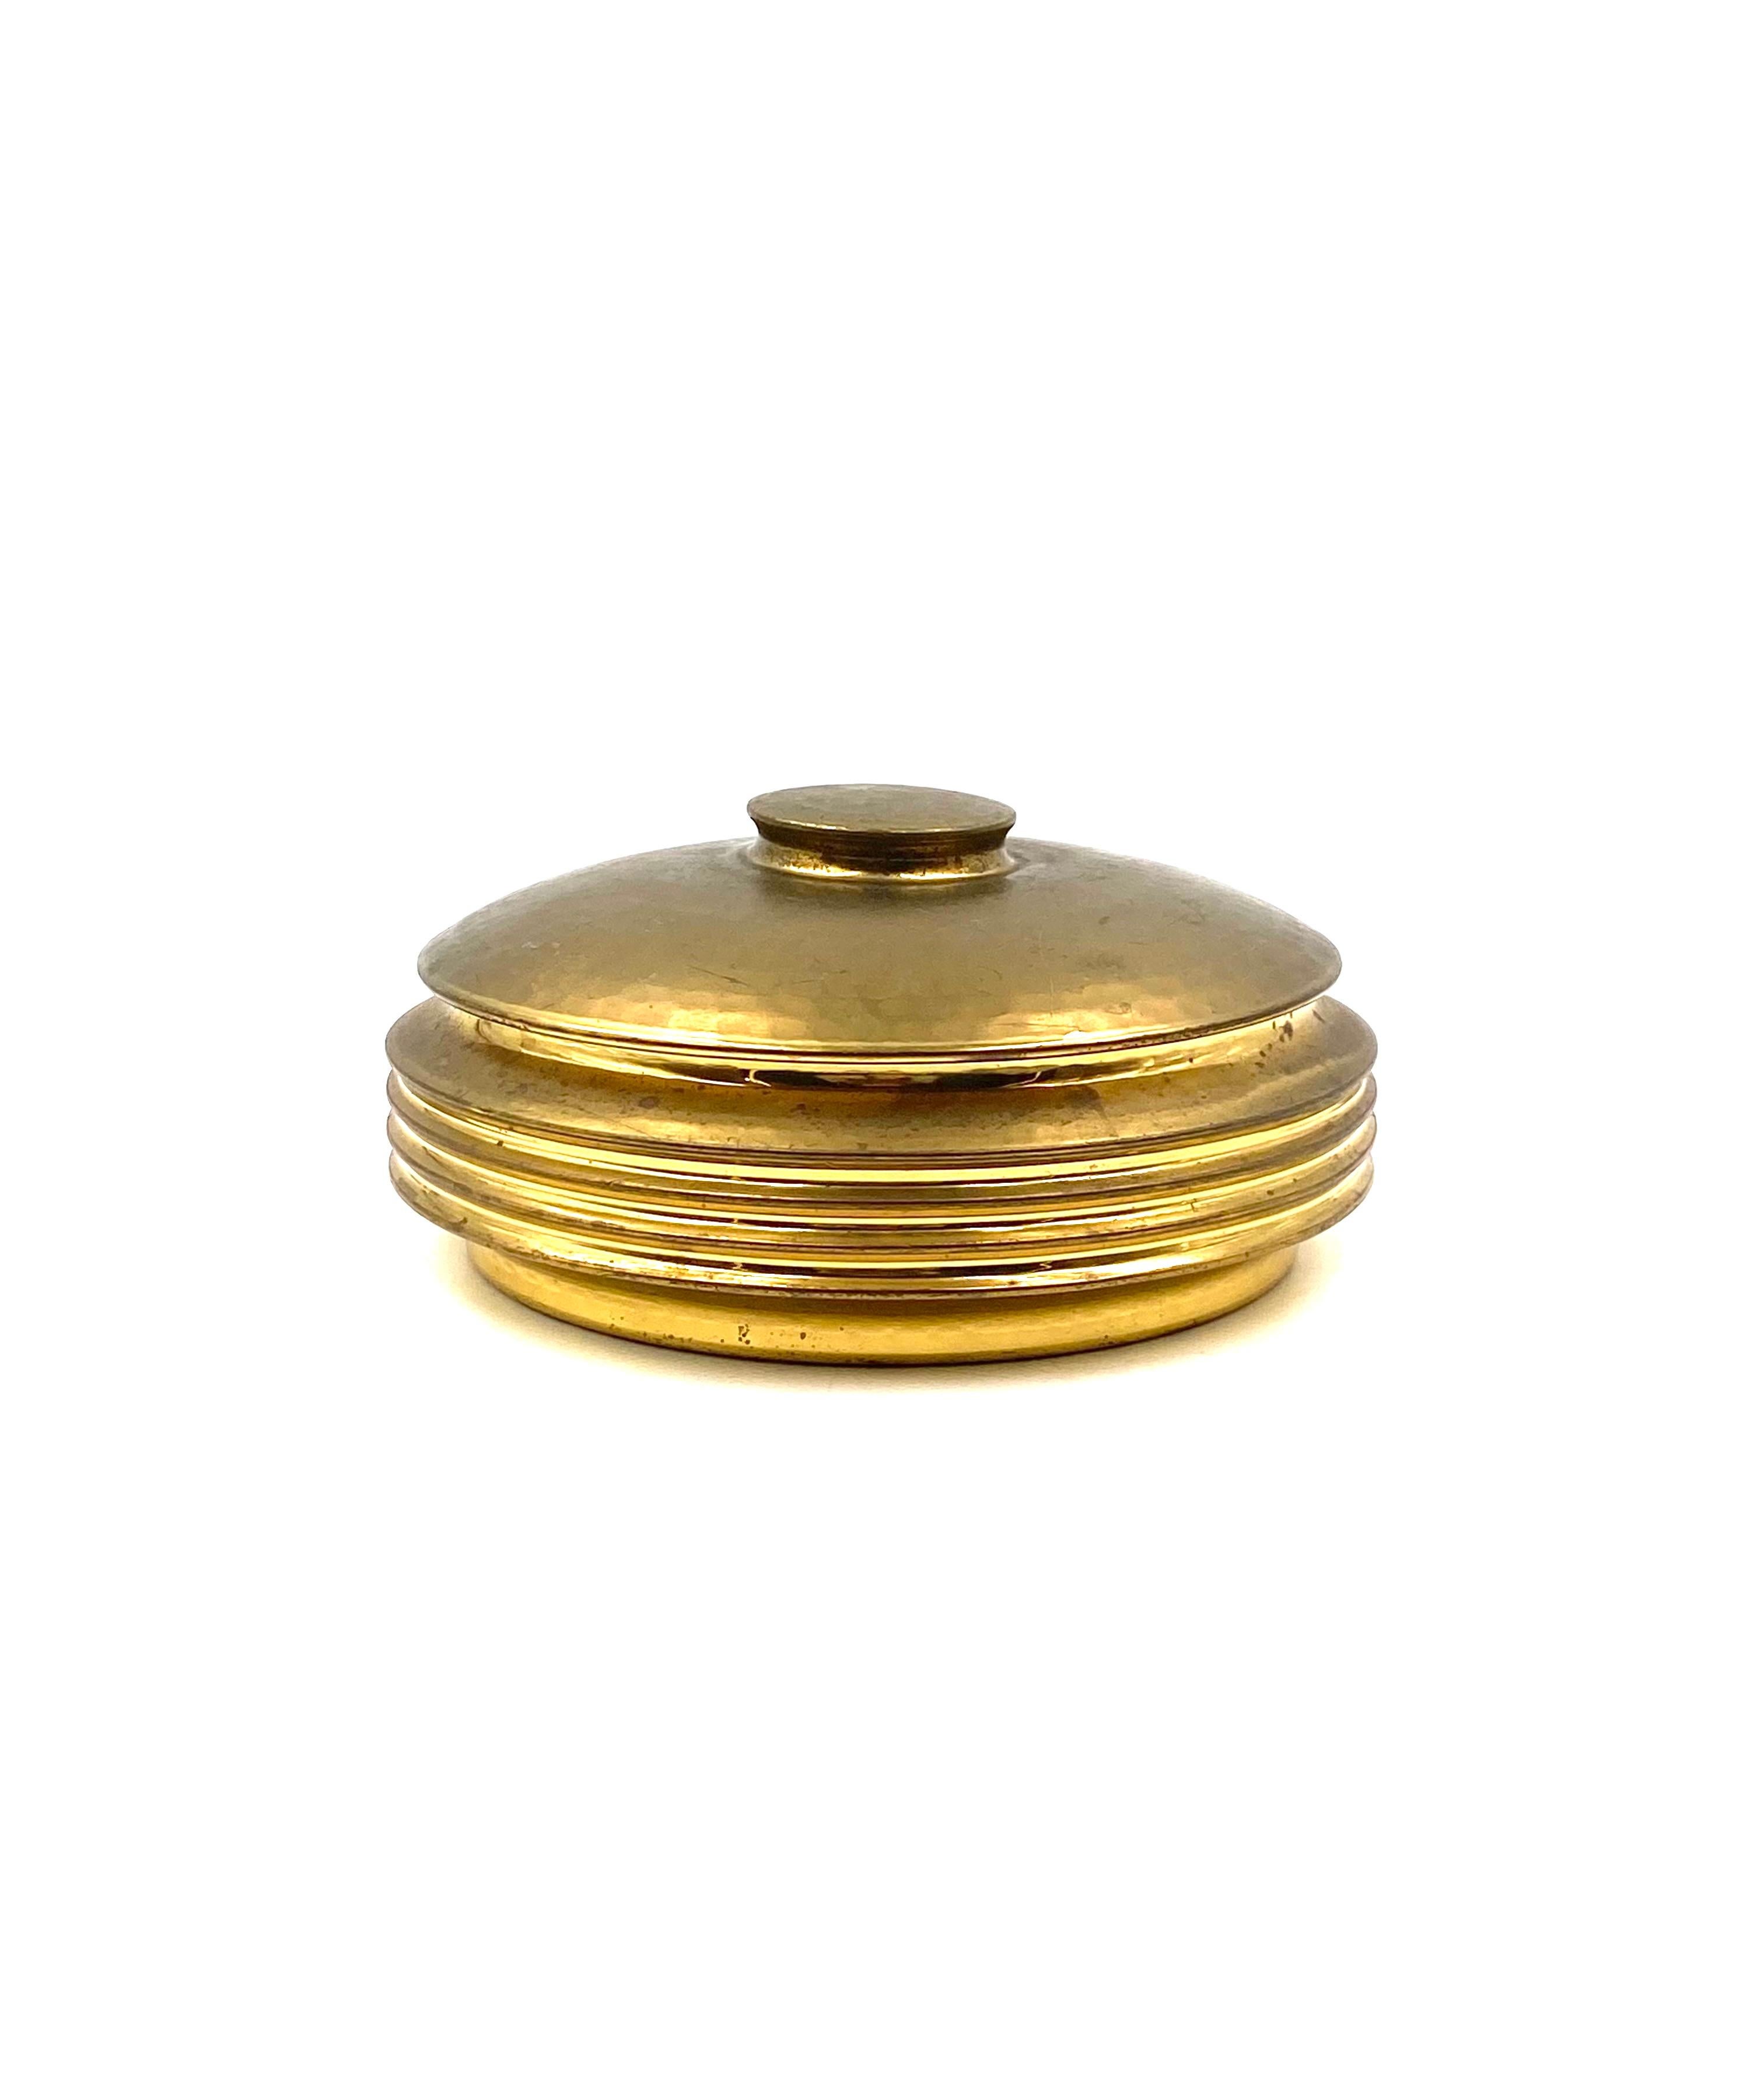 Hollywood Regency Mid-century  hand-hammered brass box, Zanetto Padova Italy 1970s For Sale